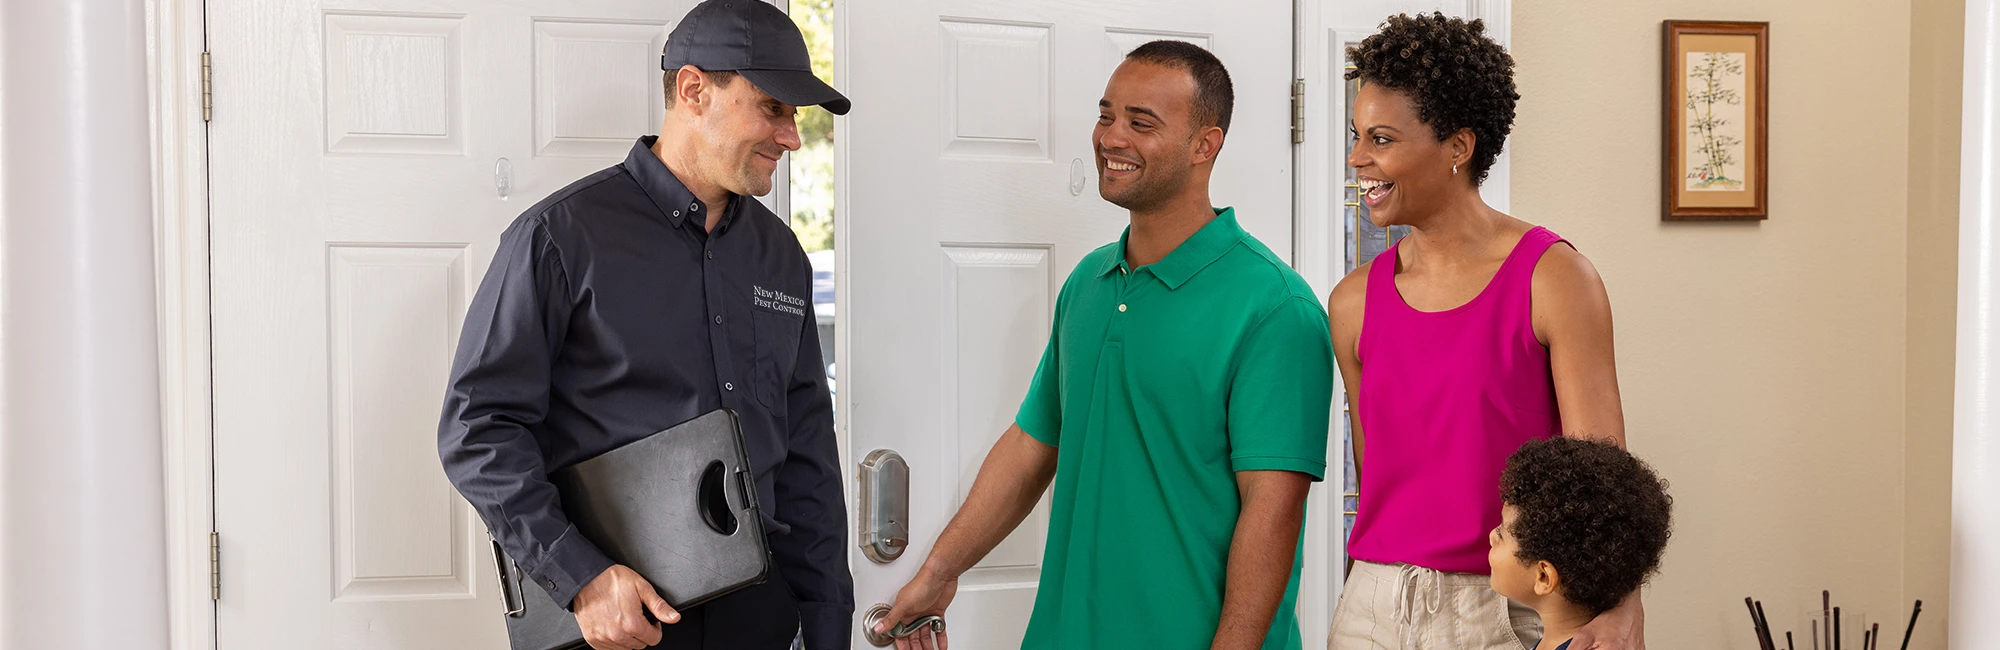 Tech speaking with a customer in front of a house | New Mexico Pest Control serving Albuquerque, NM